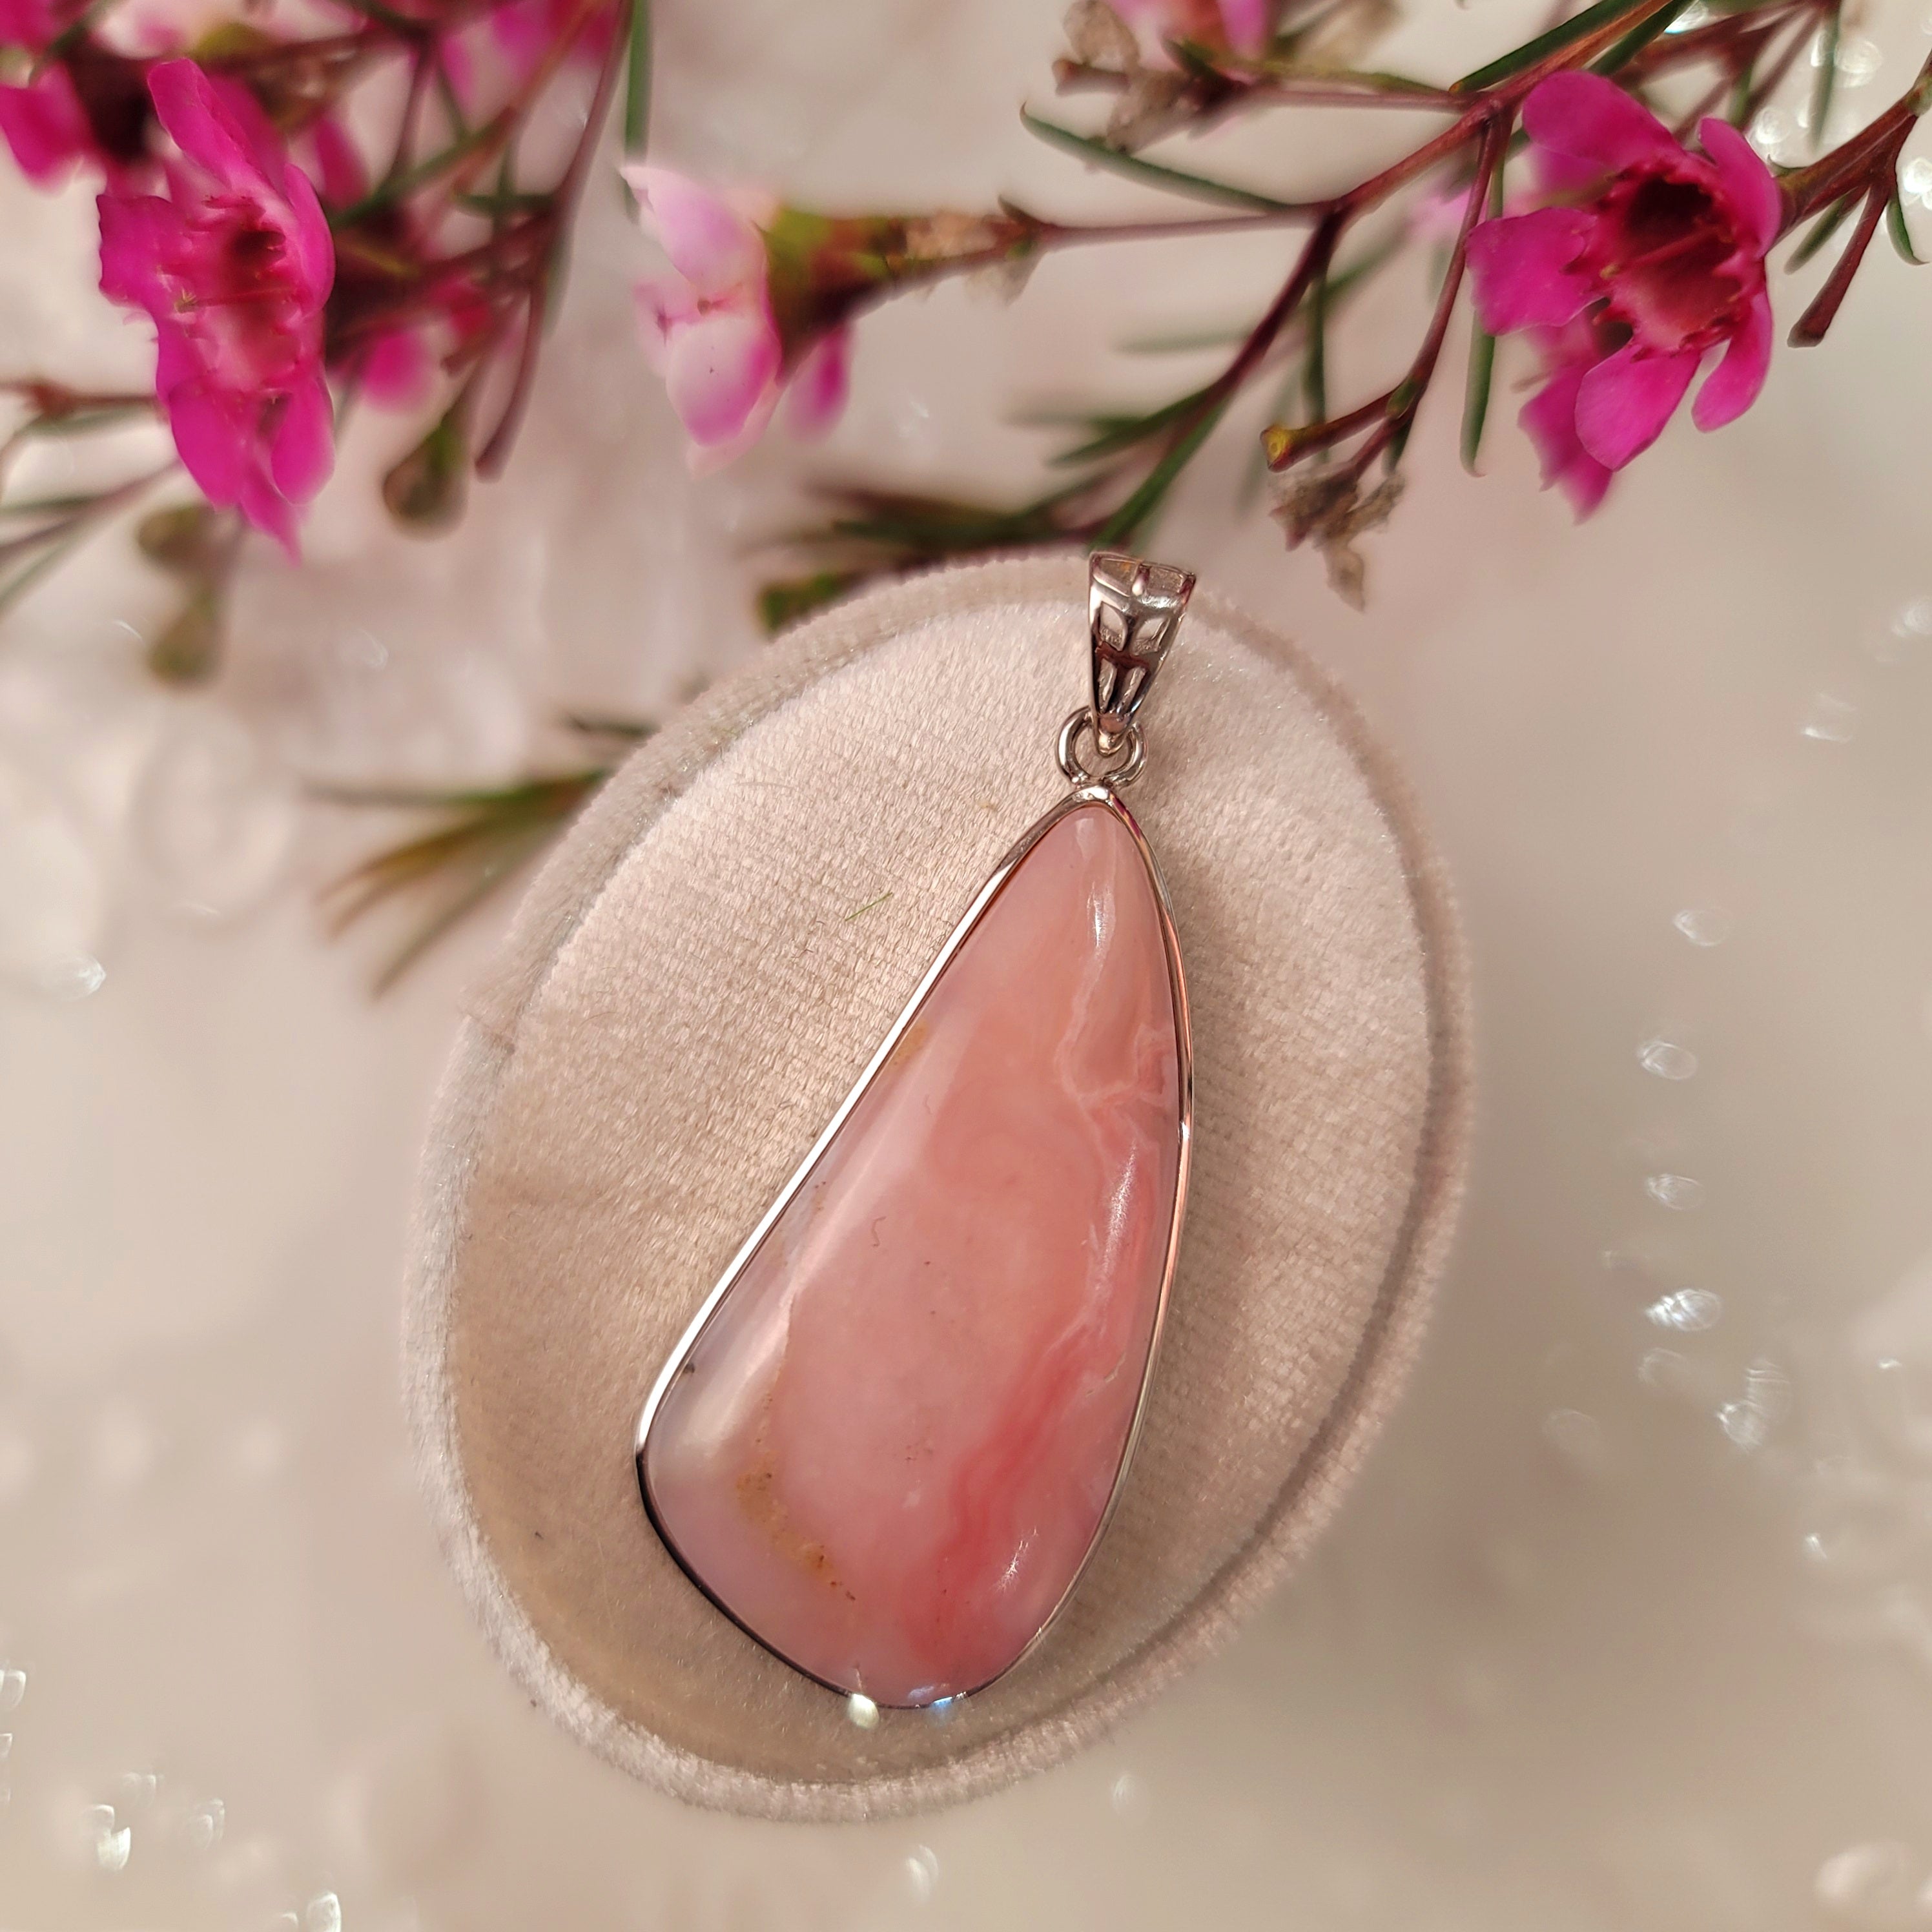 Peruvian Pink Opal Pendant .925 Silver for Love, Romance and Peace